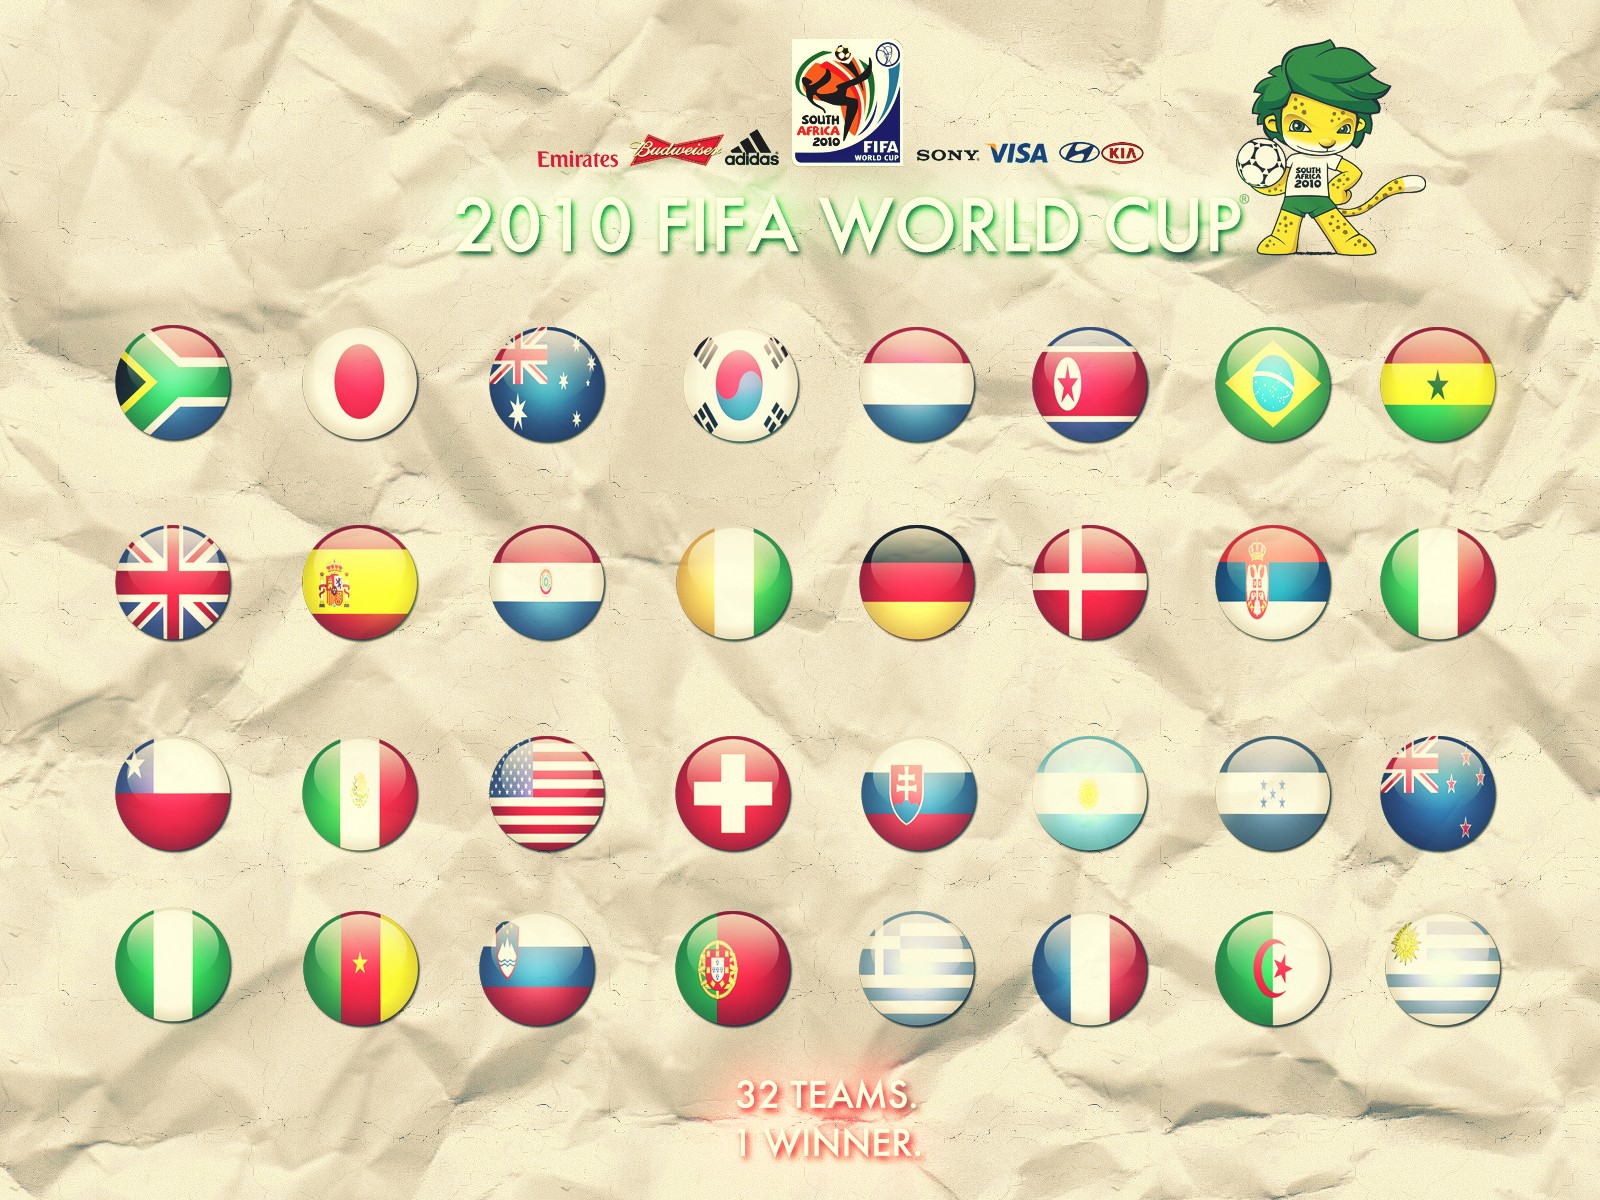 2010 FIFA World Cup :: Qualification controversies